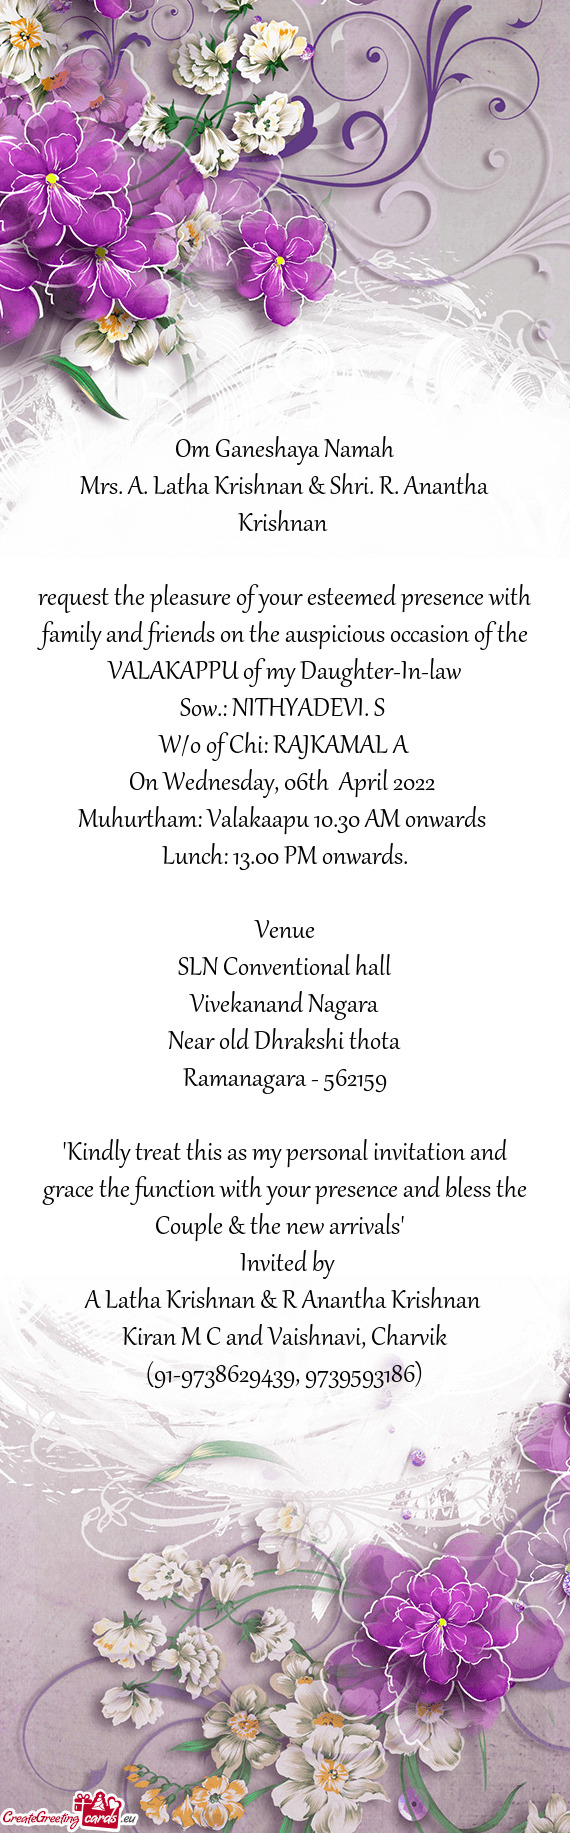 The VALAKAPPU of my Daughter-In-law